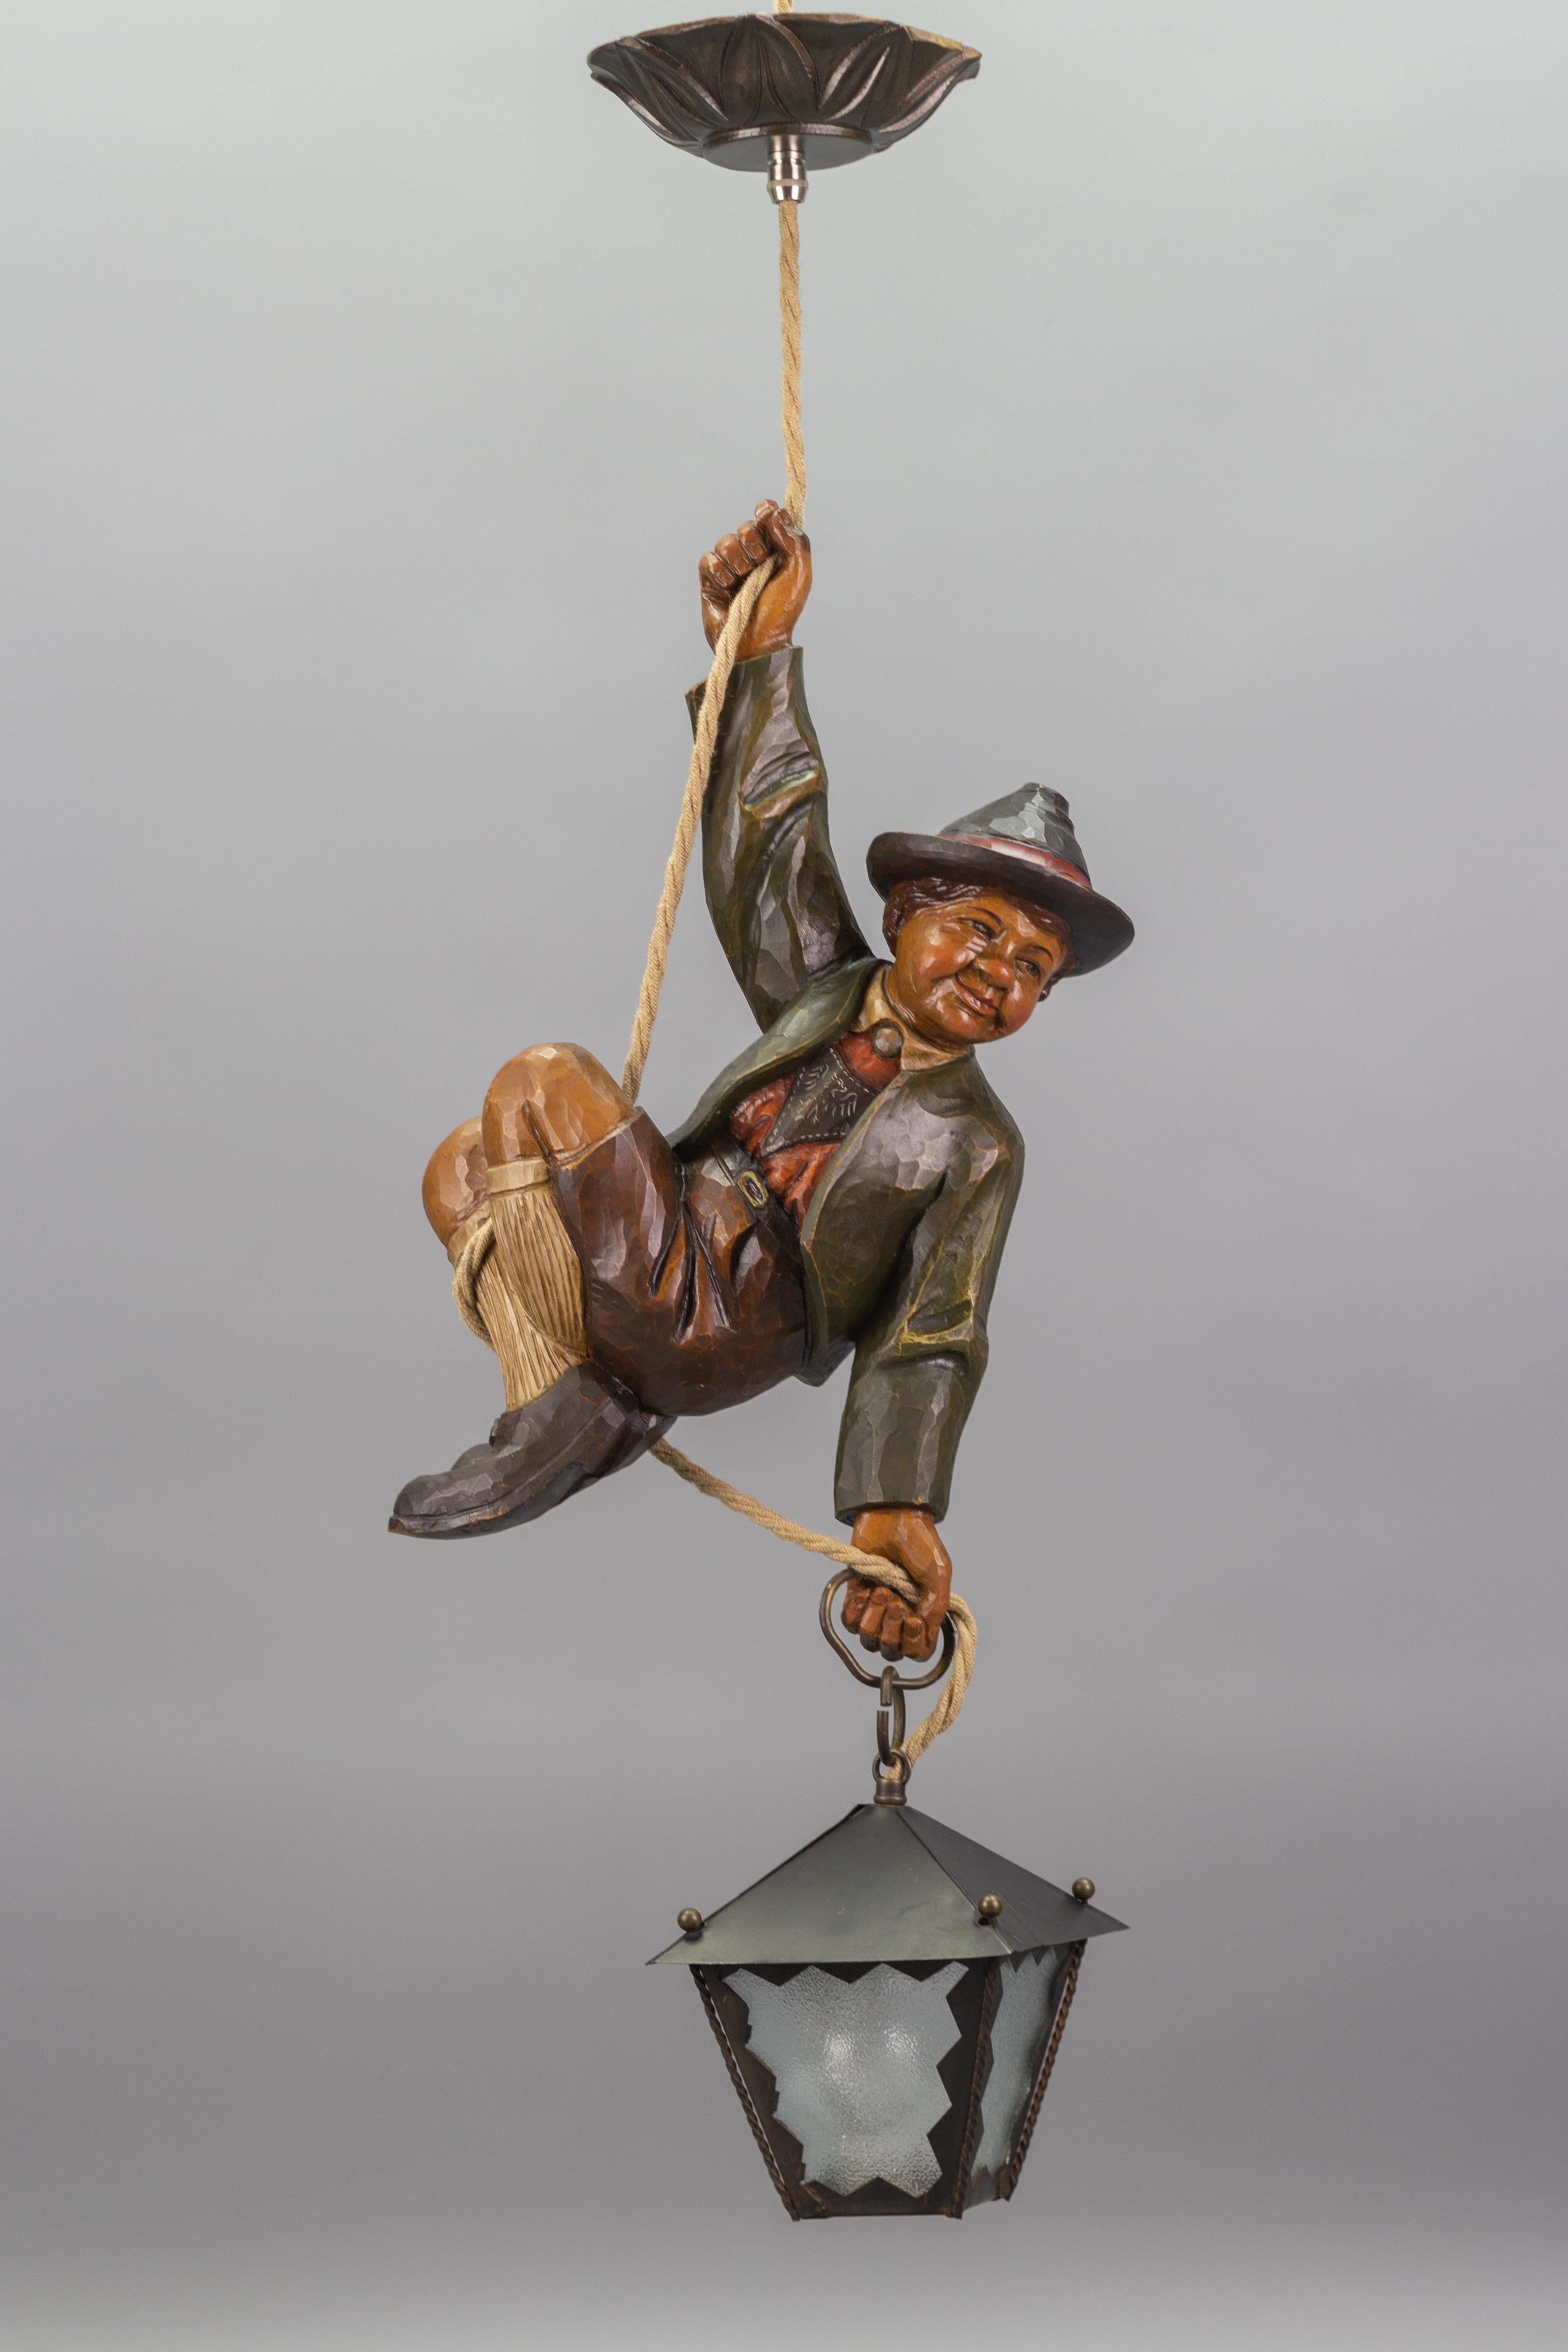 Wonderful German pendant lamp features a hand-carved figure of a smiling and cheerful mountain climber in beautifully hand-painted Bavarian traditional clothing in brown, green, white, and red colors. The detailed carved wooden figure wears a hat